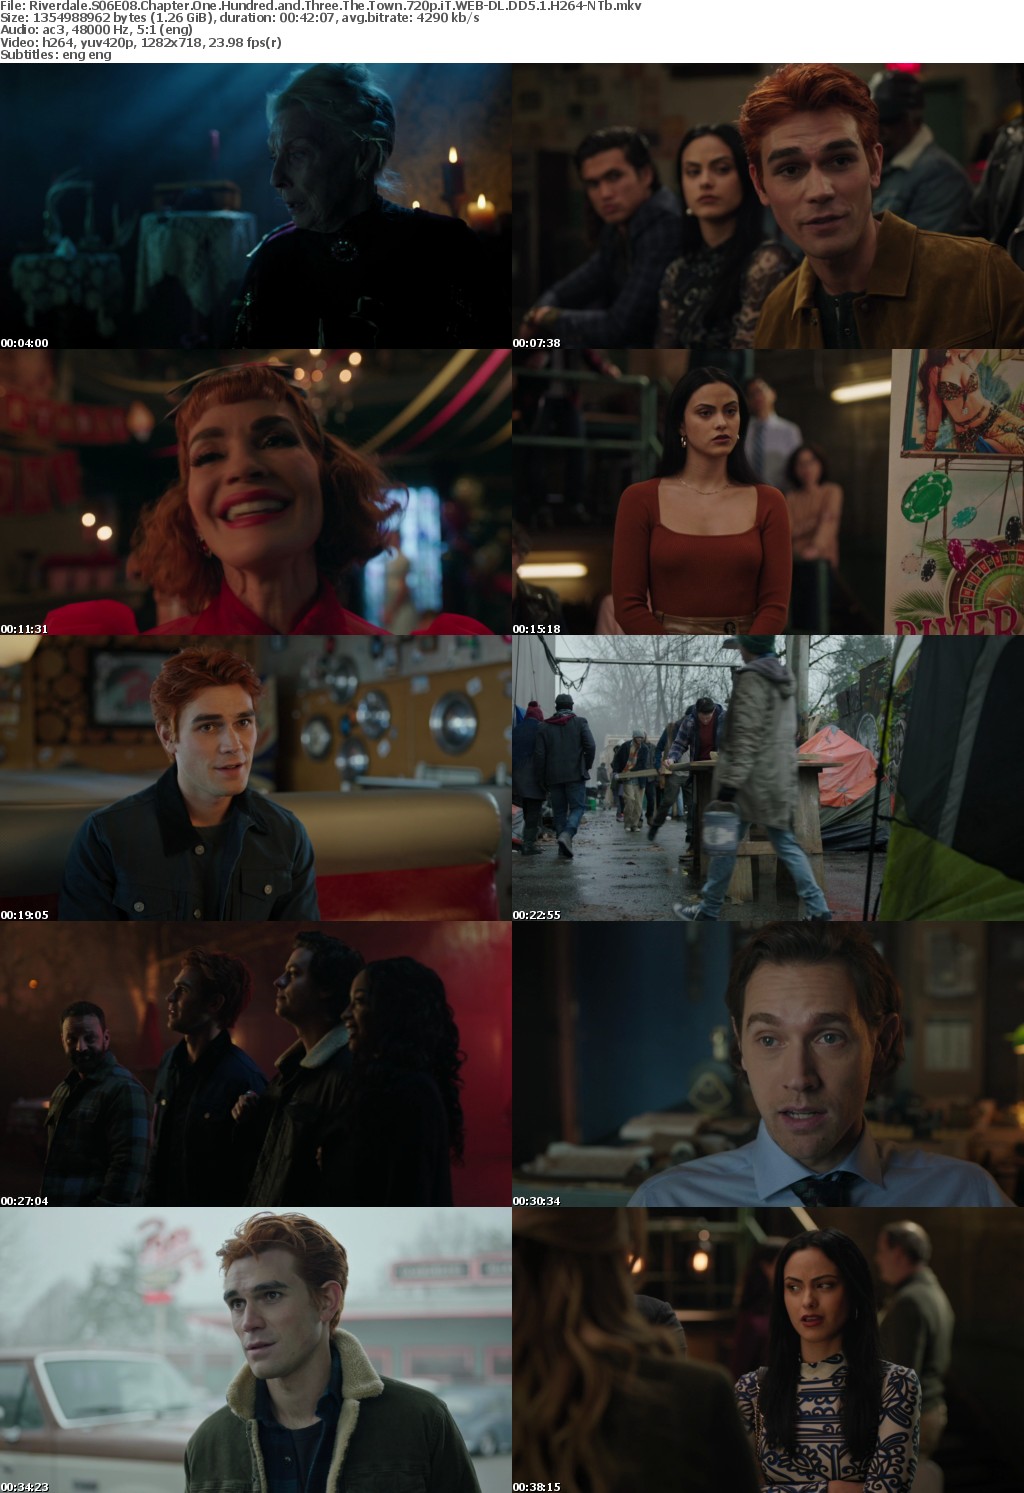 Riverdale US S06E08 Chapter One Hundred and Three The Town 720p WEB-DL DD5 1 H264-NTb